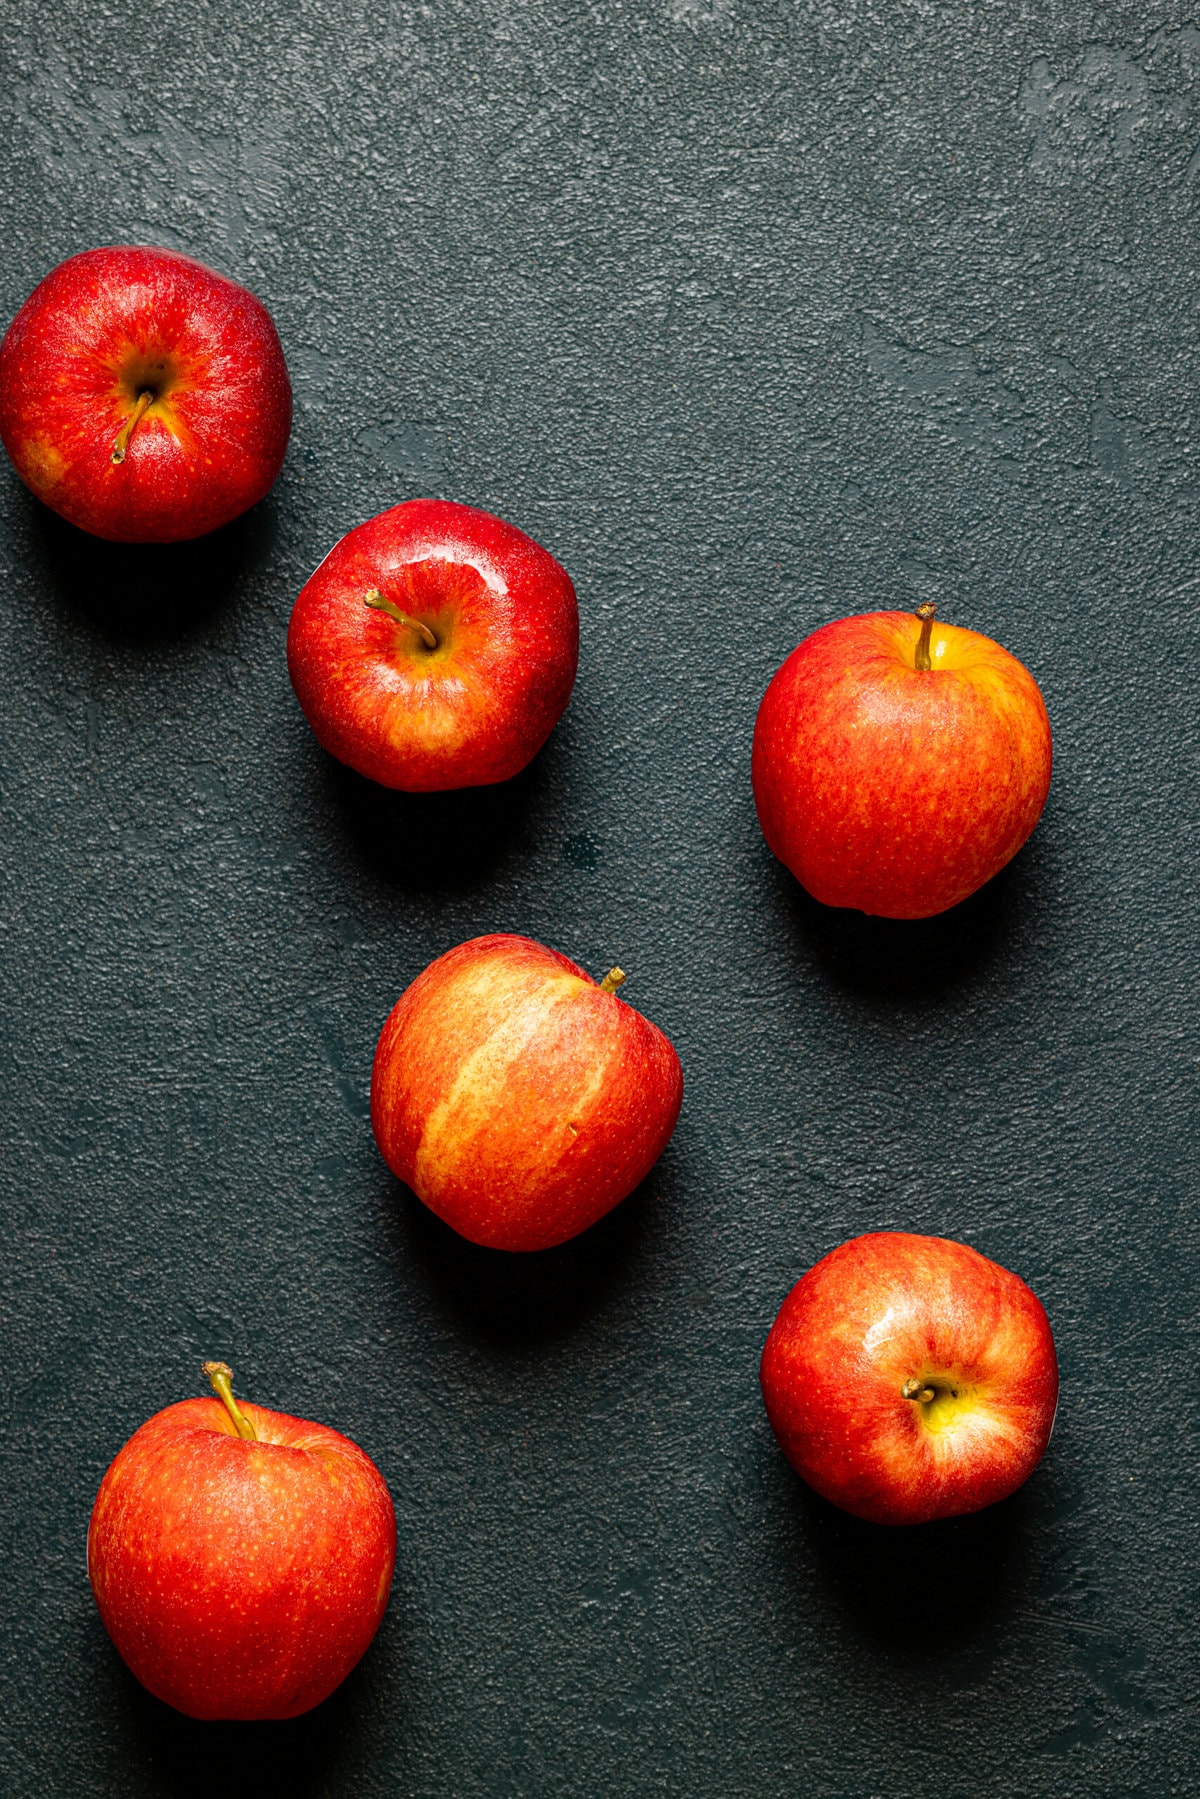 Group of red apples on a dark green table.